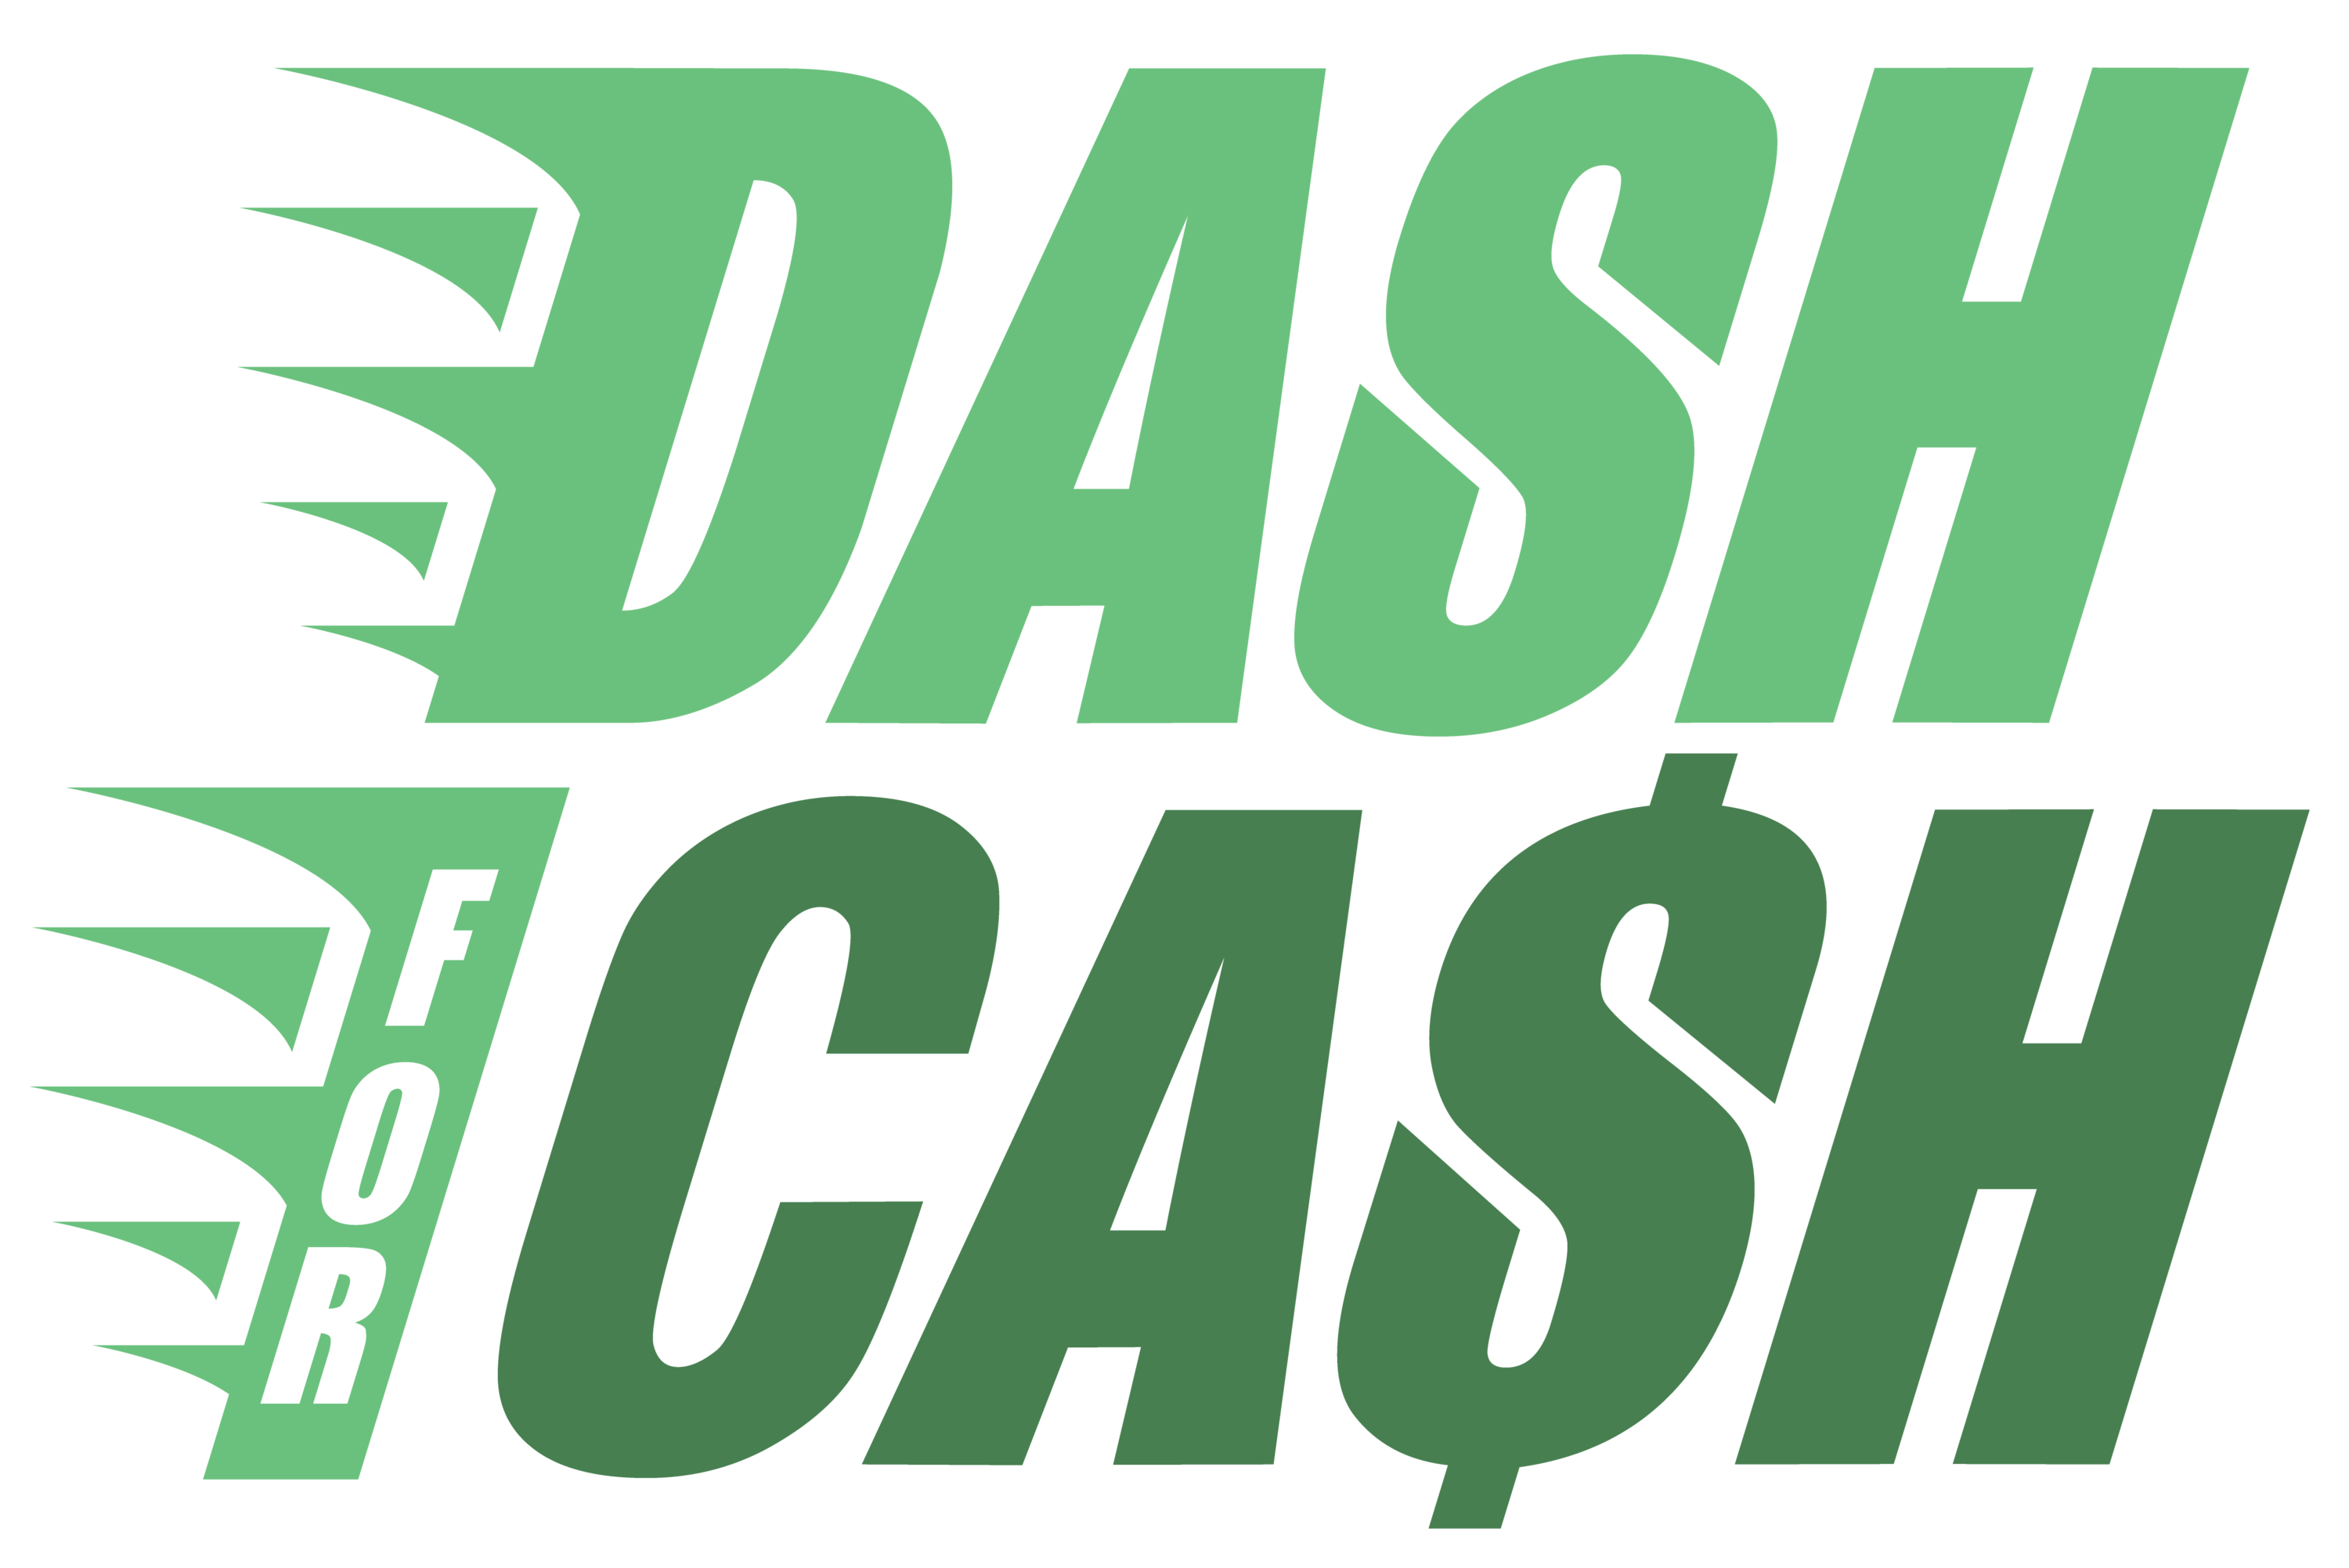 Dash For Cash 10 Day Challenge with Frazer Brookes